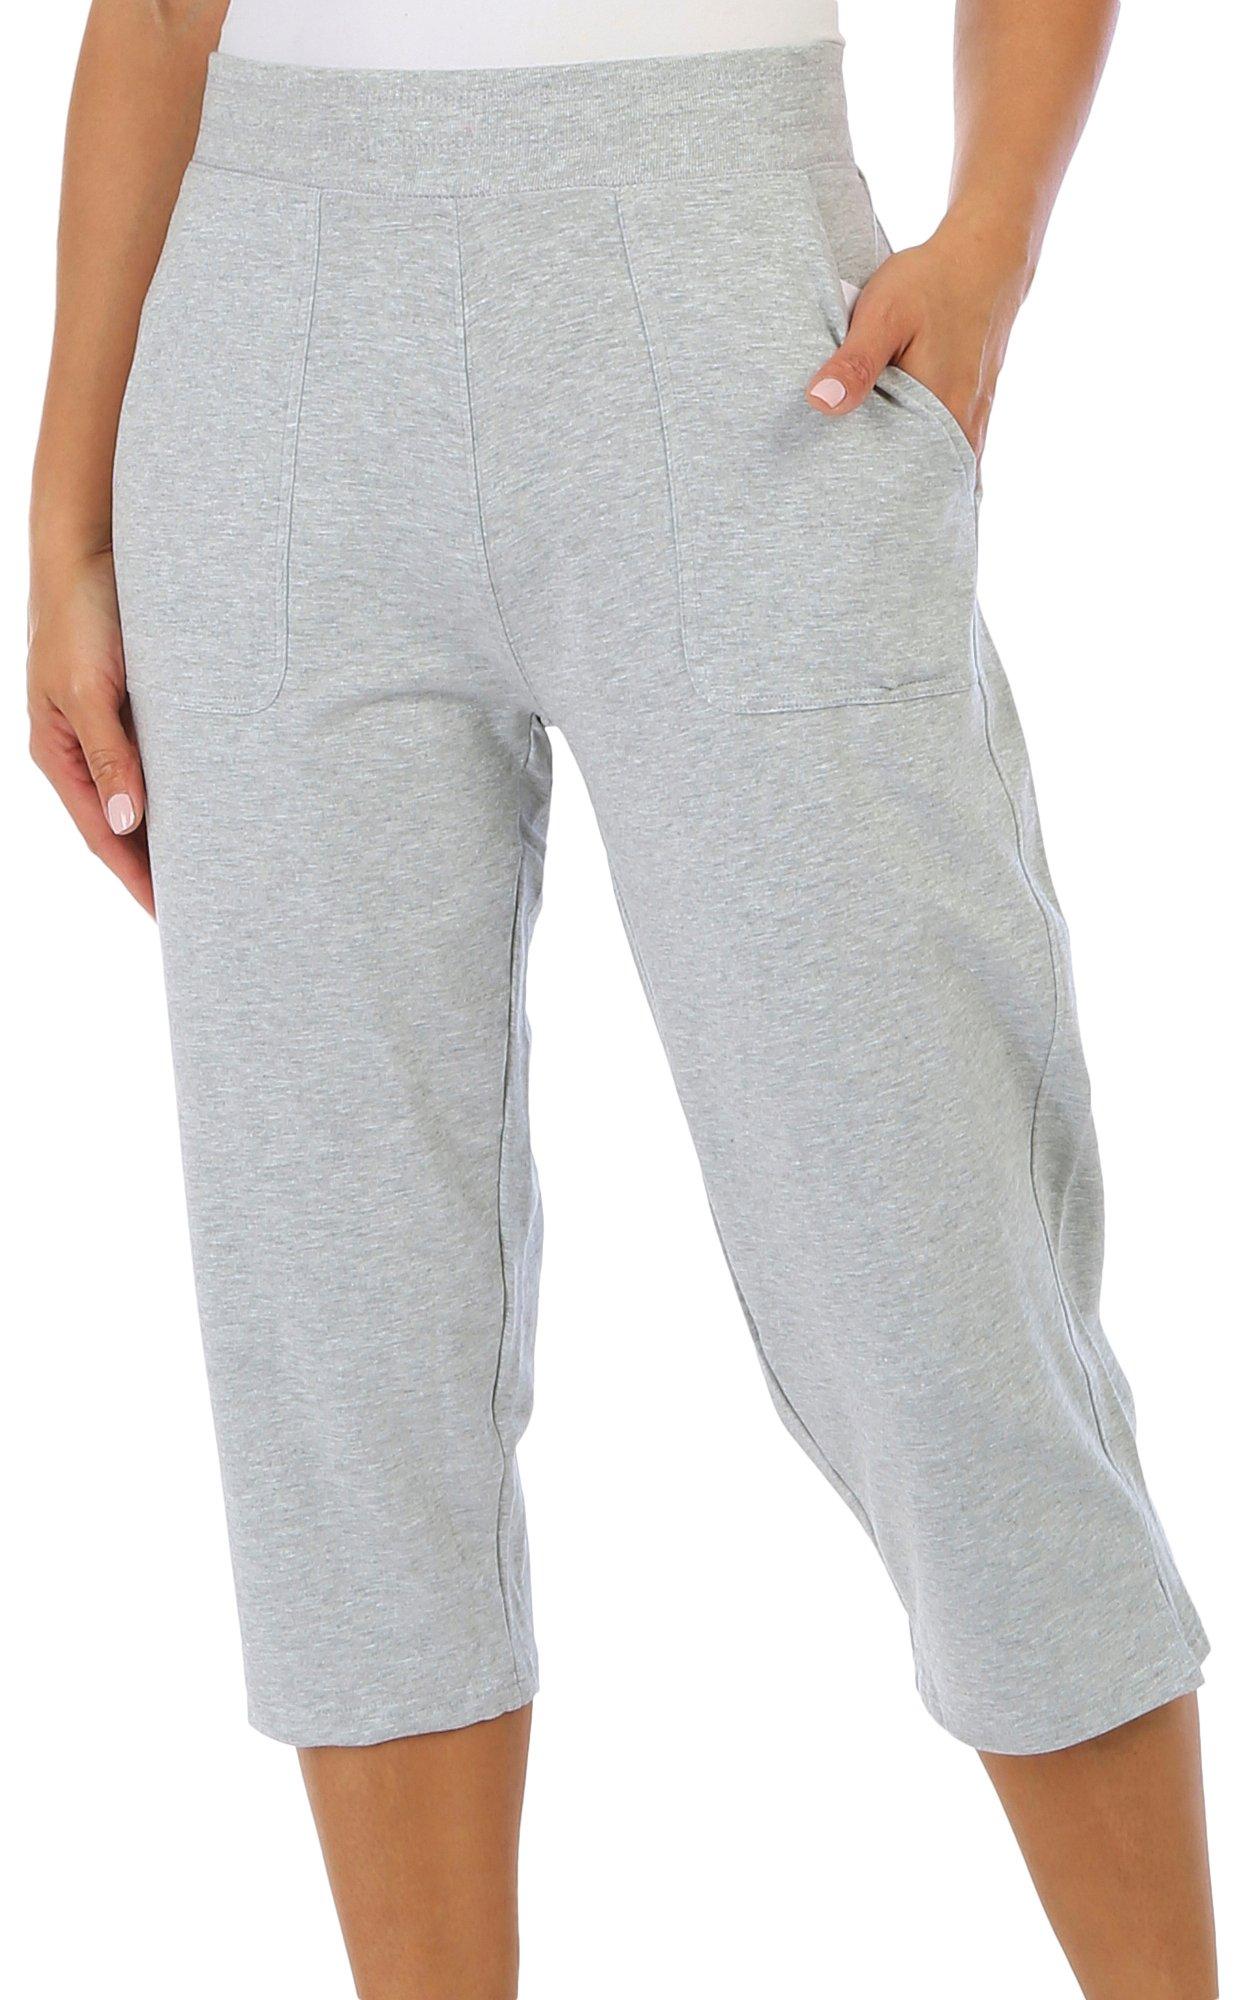 Coral Bay Petite 22in. Heathered French Terry Capris